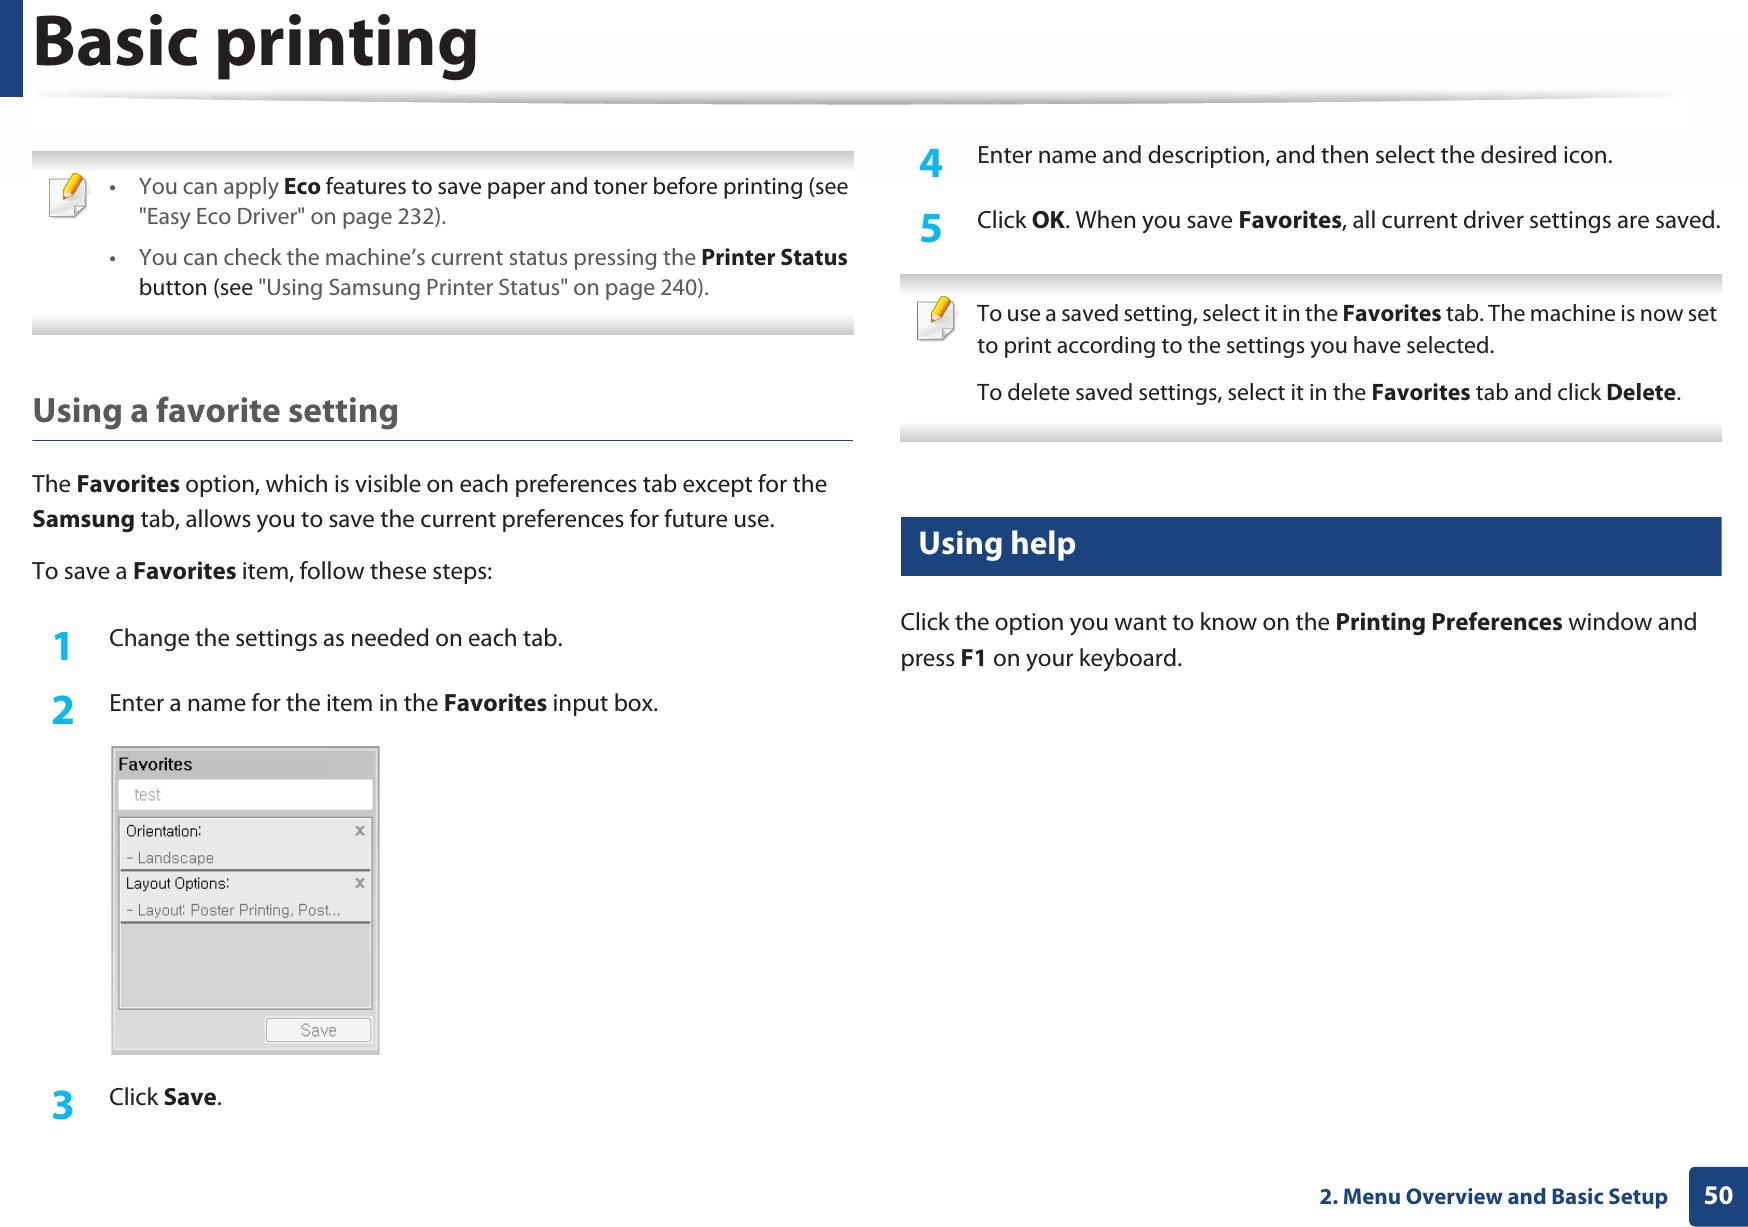 Basic printing502. Menu Overview and Basic Setup •You can apply Eco features to save paper and toner before printing (see &quot;Easy Eco Driver&quot; on page 232).• You can check the machine’s current status pressing the Printer Status button (see &quot;Using Samsung Printer Status&quot; on page 240). Using a favorite settingThe Favorites option, which is visible on each preferences tab except for the Samsung tab, allows you to save the current preferences for future use.To save a Favorites item, follow these steps:1Change the settings as needed on each tab. 2  Enter a name for the item in the Favorites input box.3  Click Save. 4  Enter name and description, and then select the desired icon.5  Click OK. When you save Favorites, all current driver settings are saved. To use a saved setting, select it in the Favorites tab. The machine is now set to print according to the settings you have selected.To delete saved settings, select it in the Favorites tab and click Delete.  10 Using helpClick the option you want to know on the Printing Preferences window and press F1 on your keyboard.